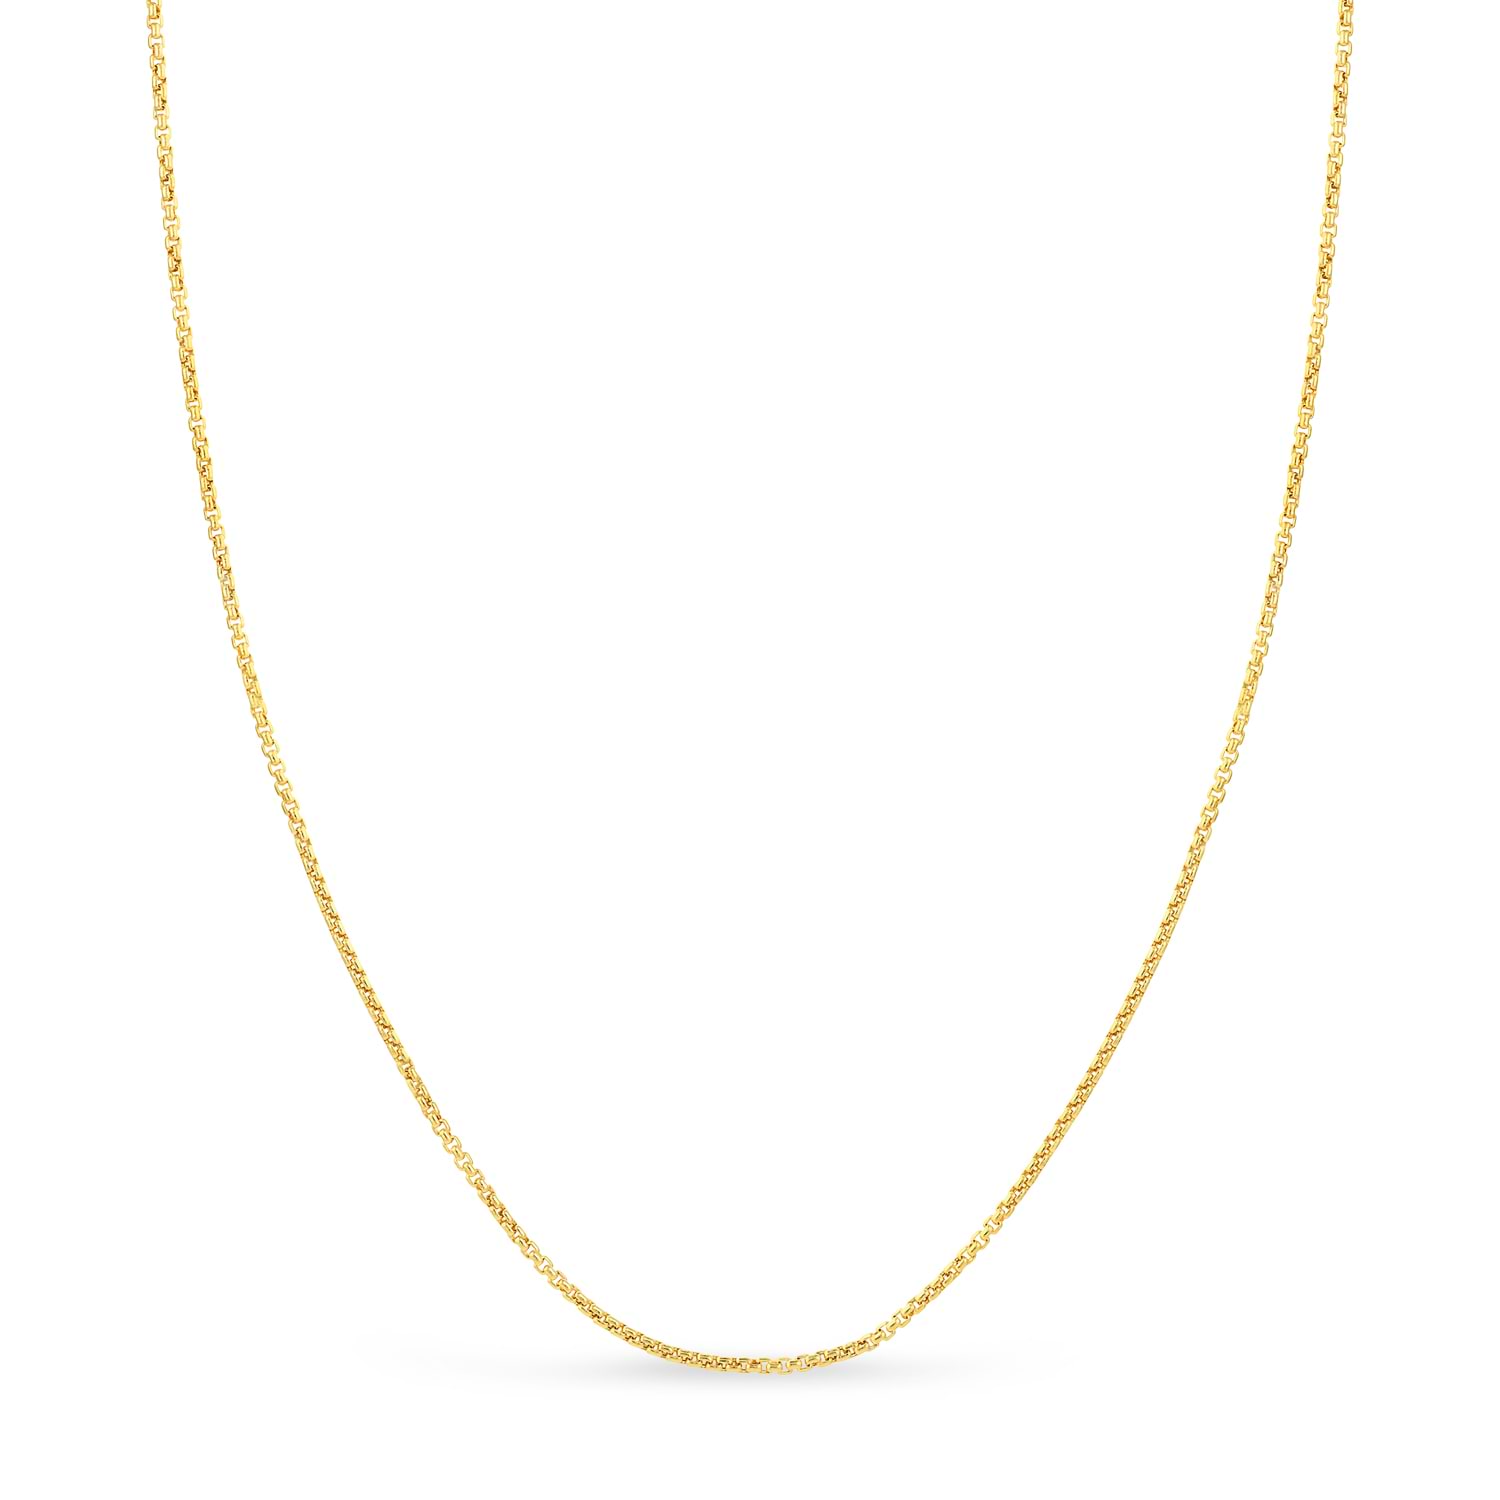 Round Box Chain Necklace 14k Yellow Gold